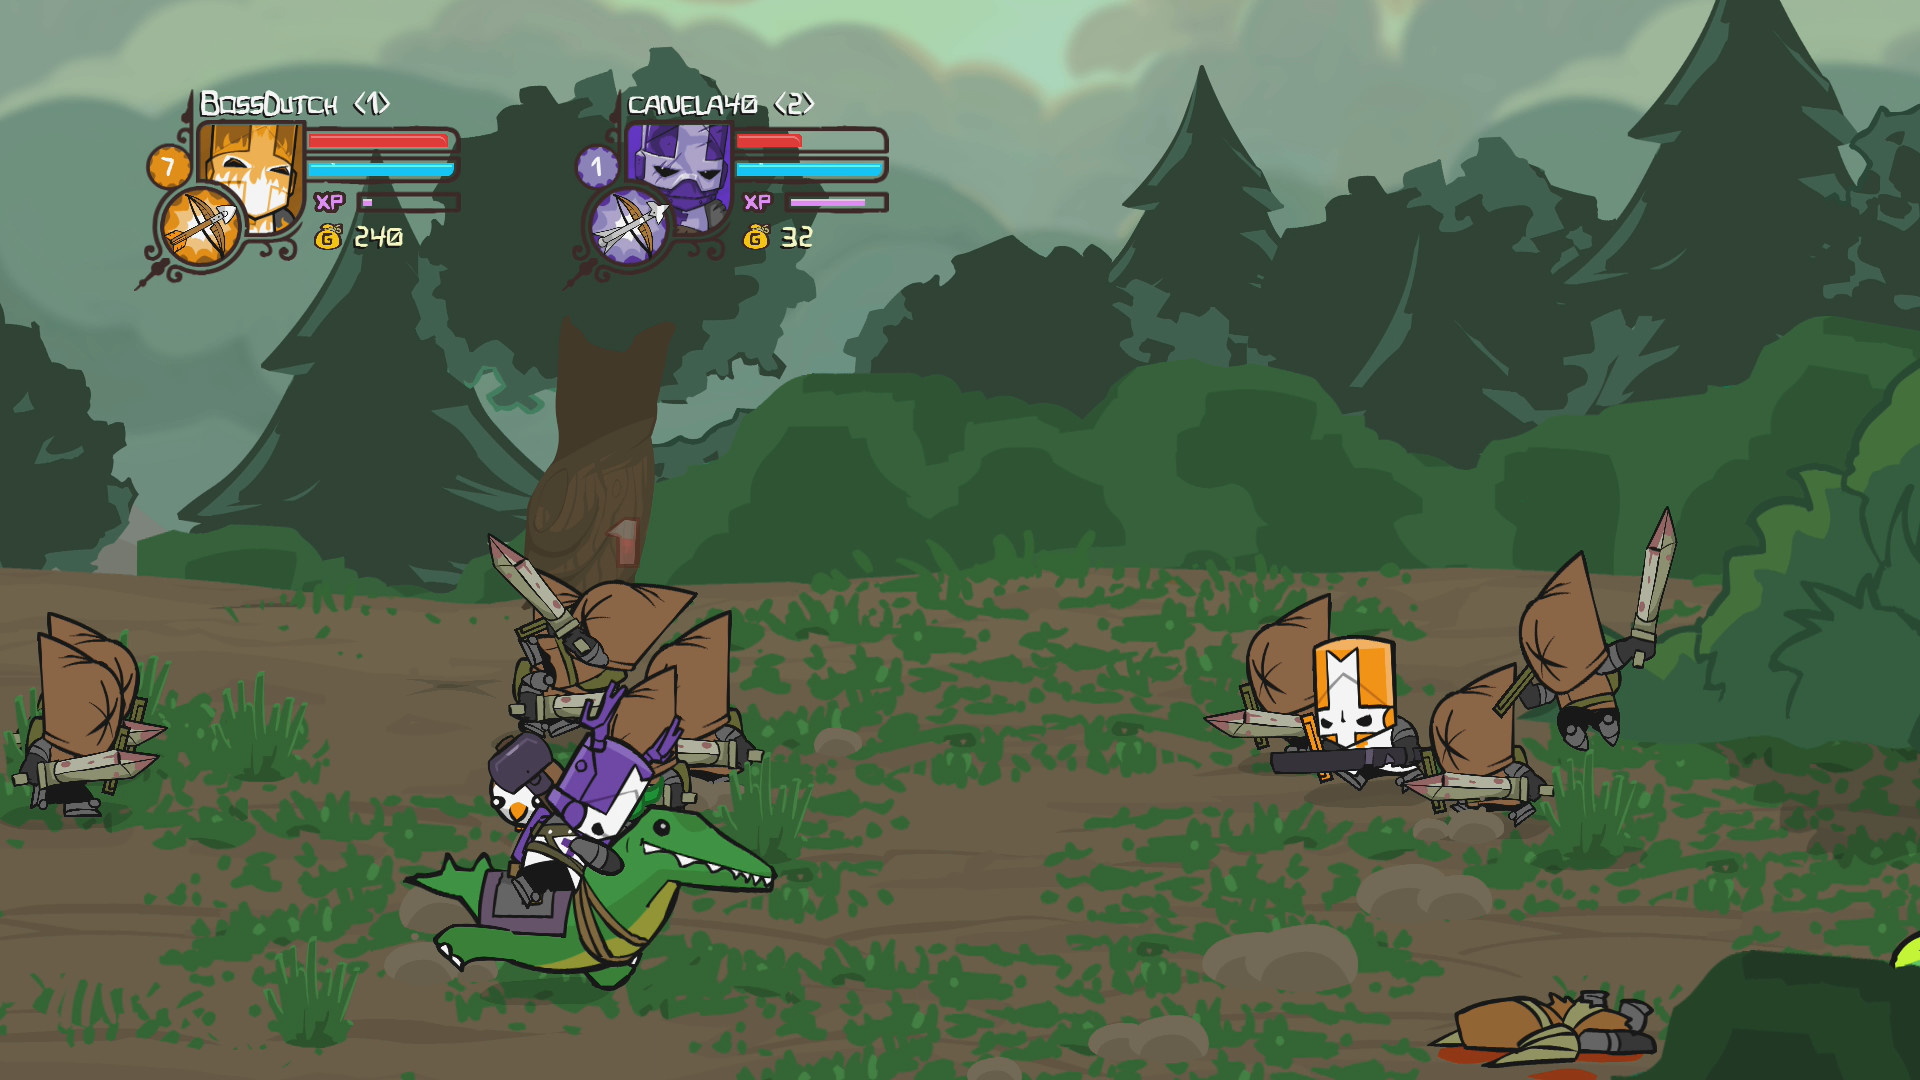 1920x1080 The original 'Castle Crashers' is very cartoonish, with bright colors and  sharp edges that give it a glossy, colored pencil kind of look.